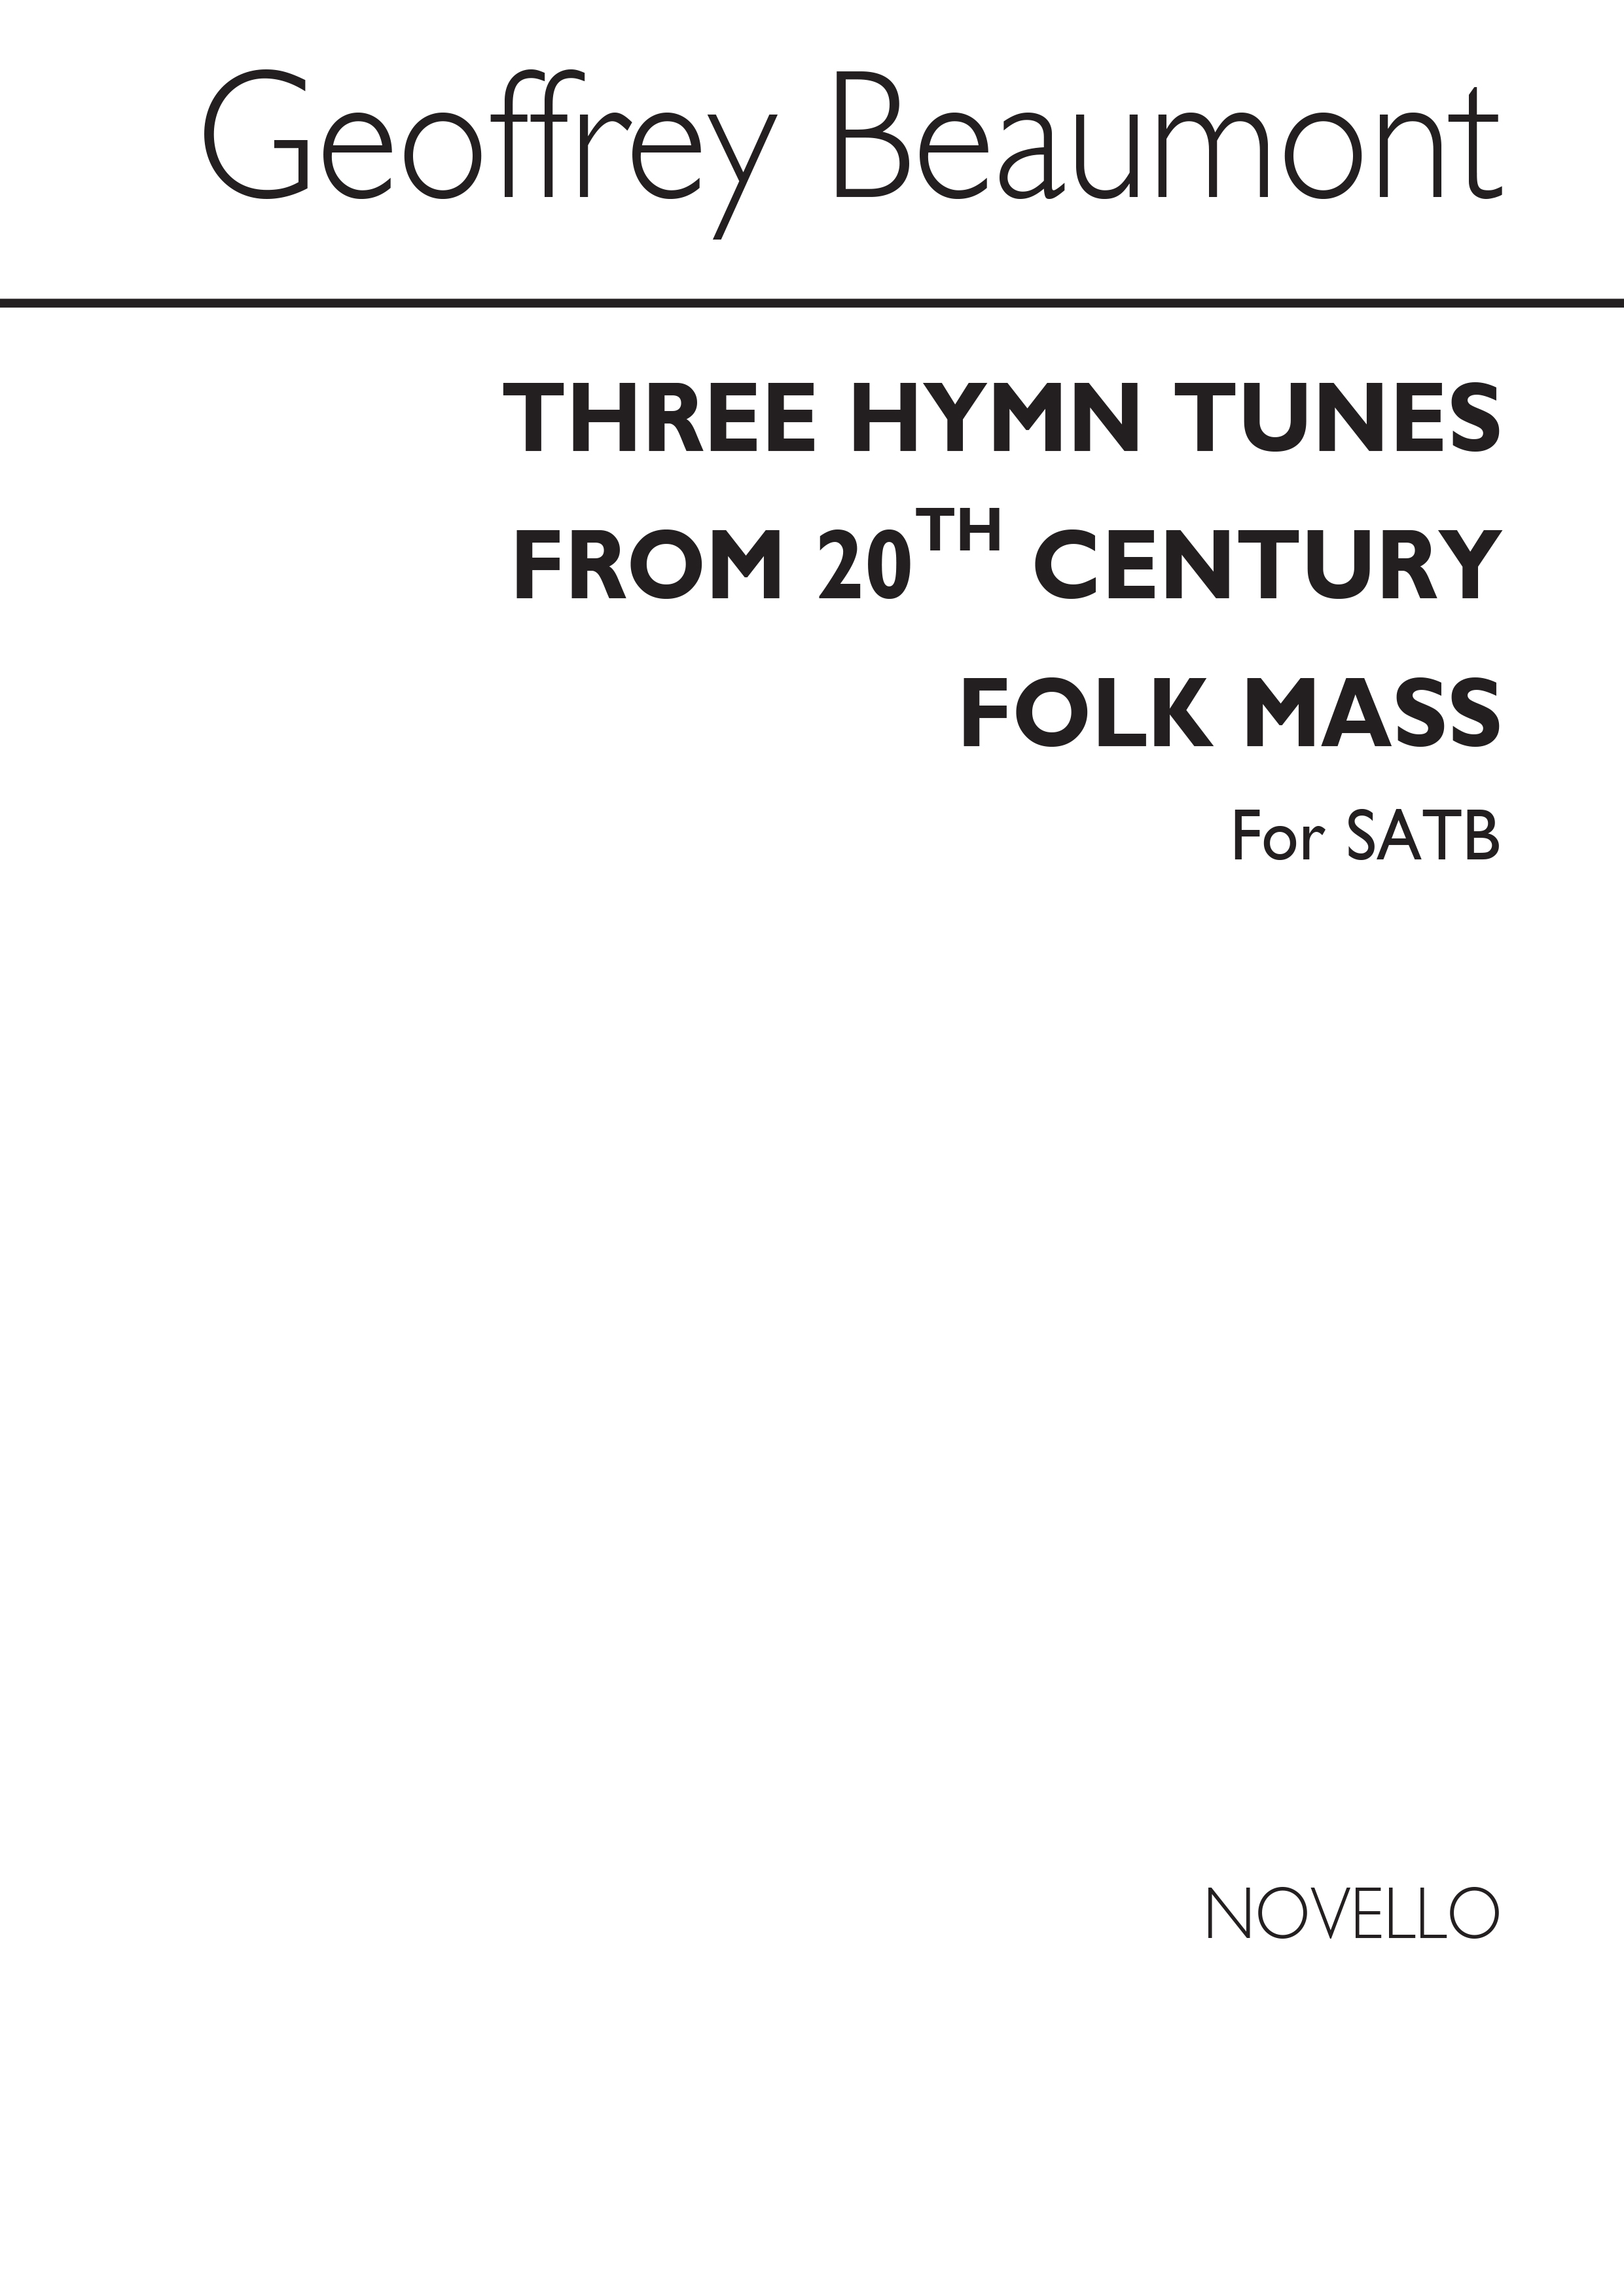 Geoffrey Beaumont: Three Hymn Tunes From The 20th Century Folkmass: SATB: Vocal